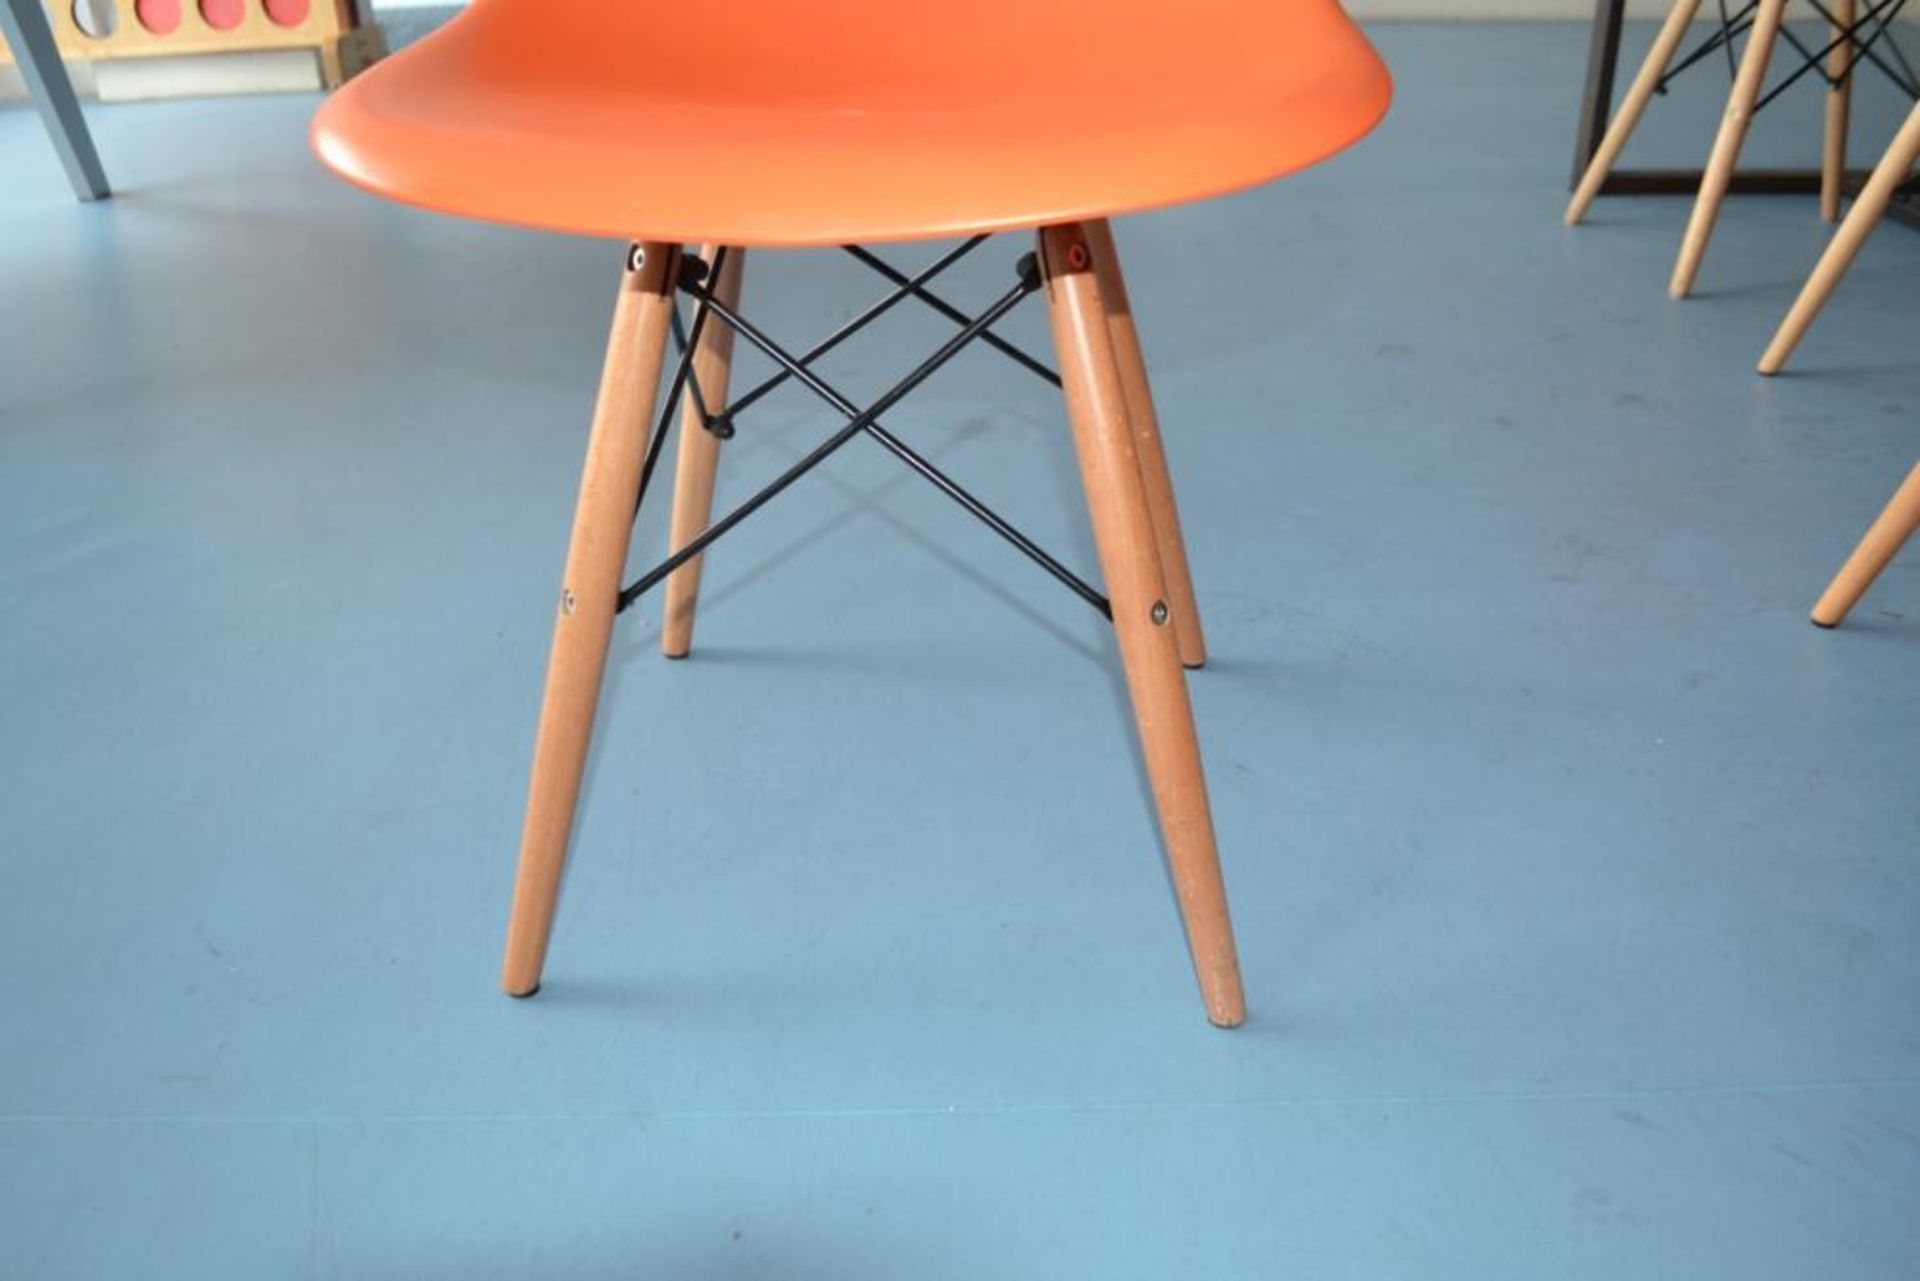 12 x Children's Orange and Red Charles and Ray Eames Style Shell Chairs - CL425 - Location: Altrinch - Image 2 of 8